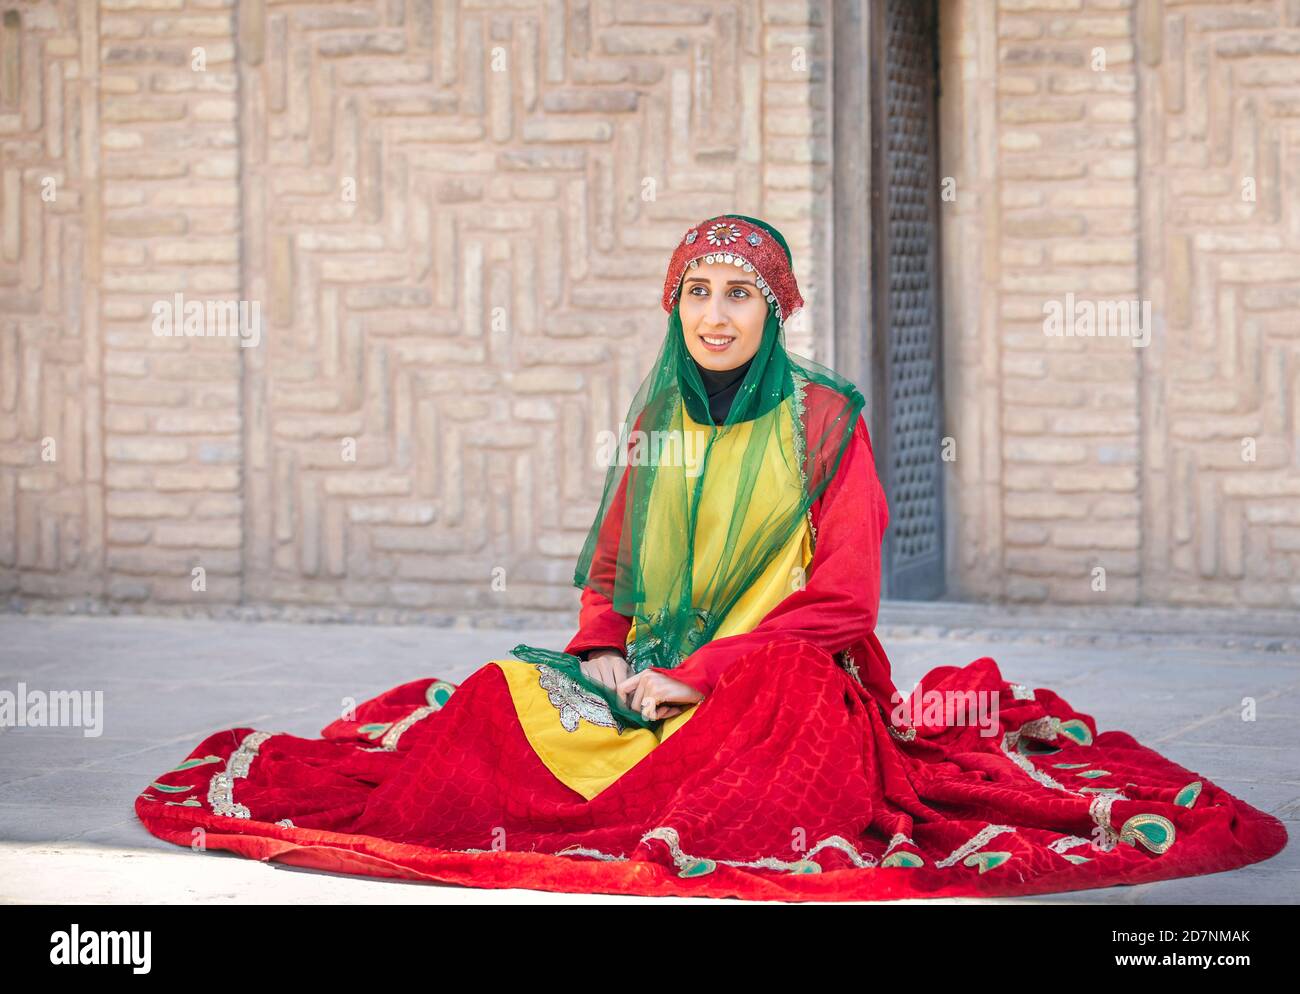 Kashan, Iran, 25. April 2019: iranische Frau in traditionellem Outfit Stockfoto